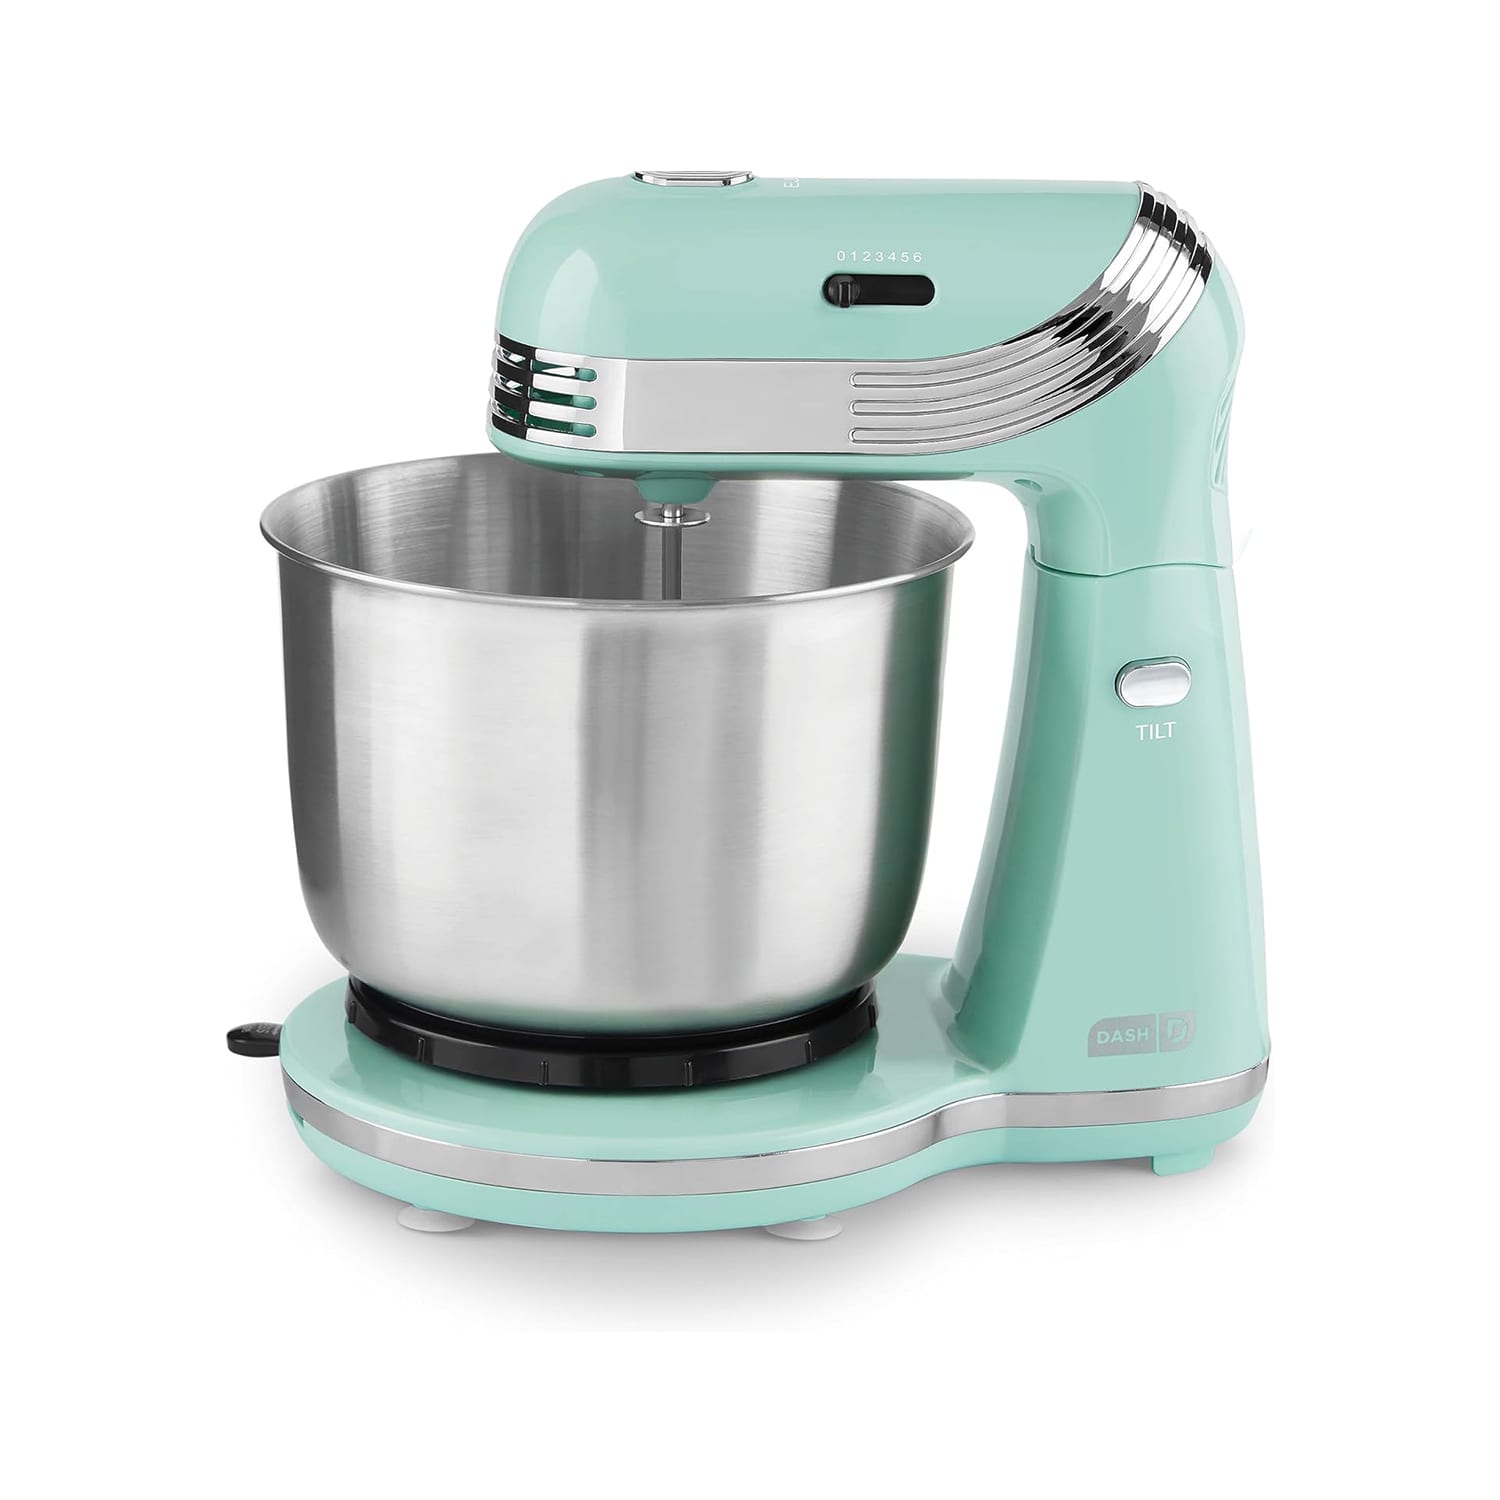 Shoppers Love the Aucma Stand Mixer